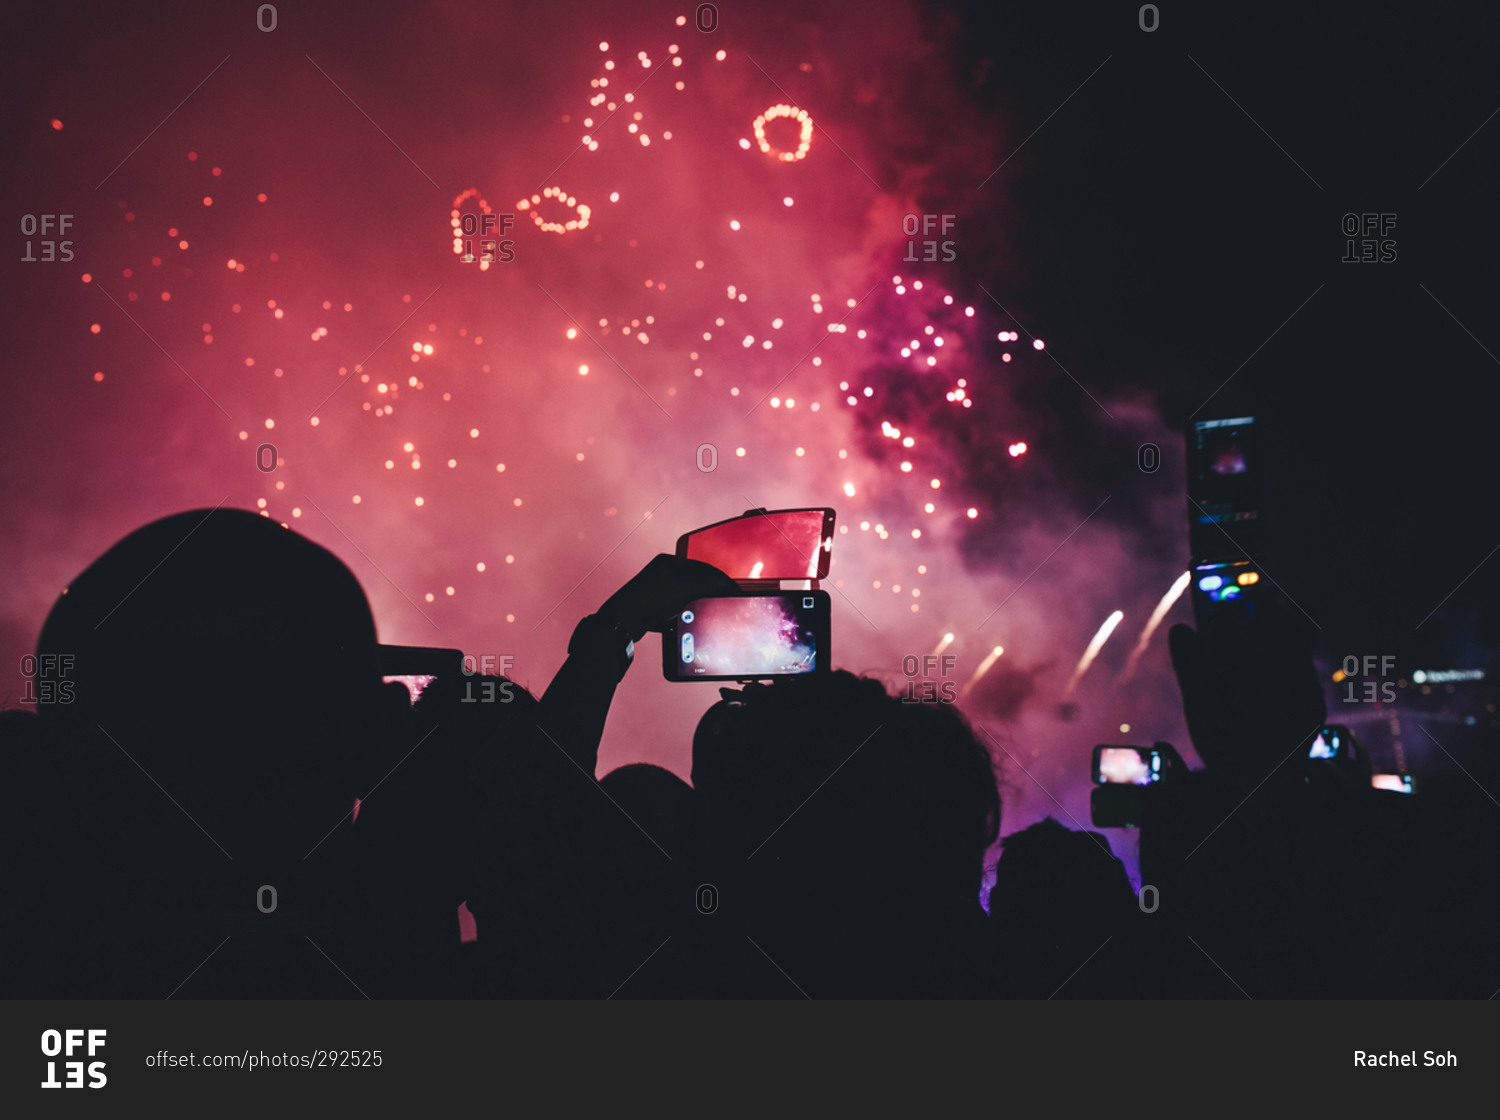 Crowd silhouetted by firework display